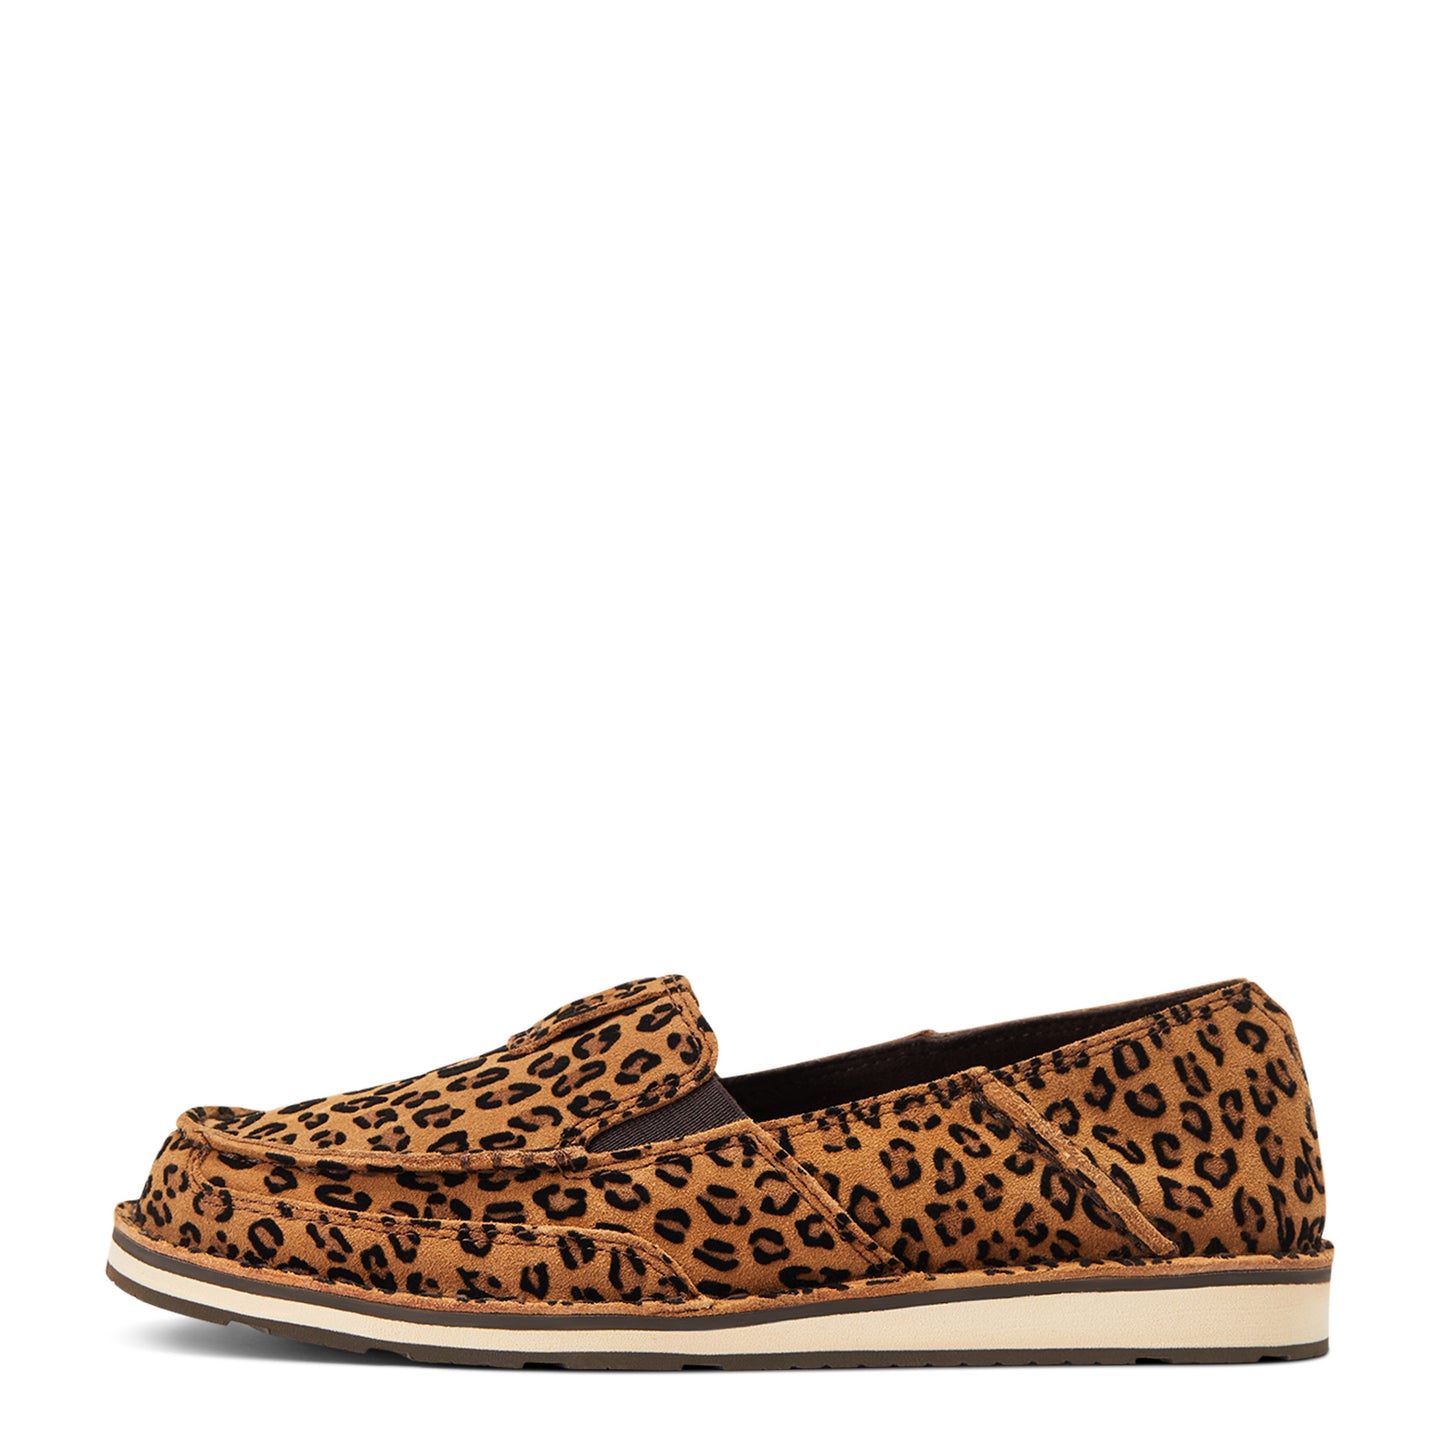 Ariat® Ladies Cruiser Likely Leopard Printed Slip On Shoes 10040355